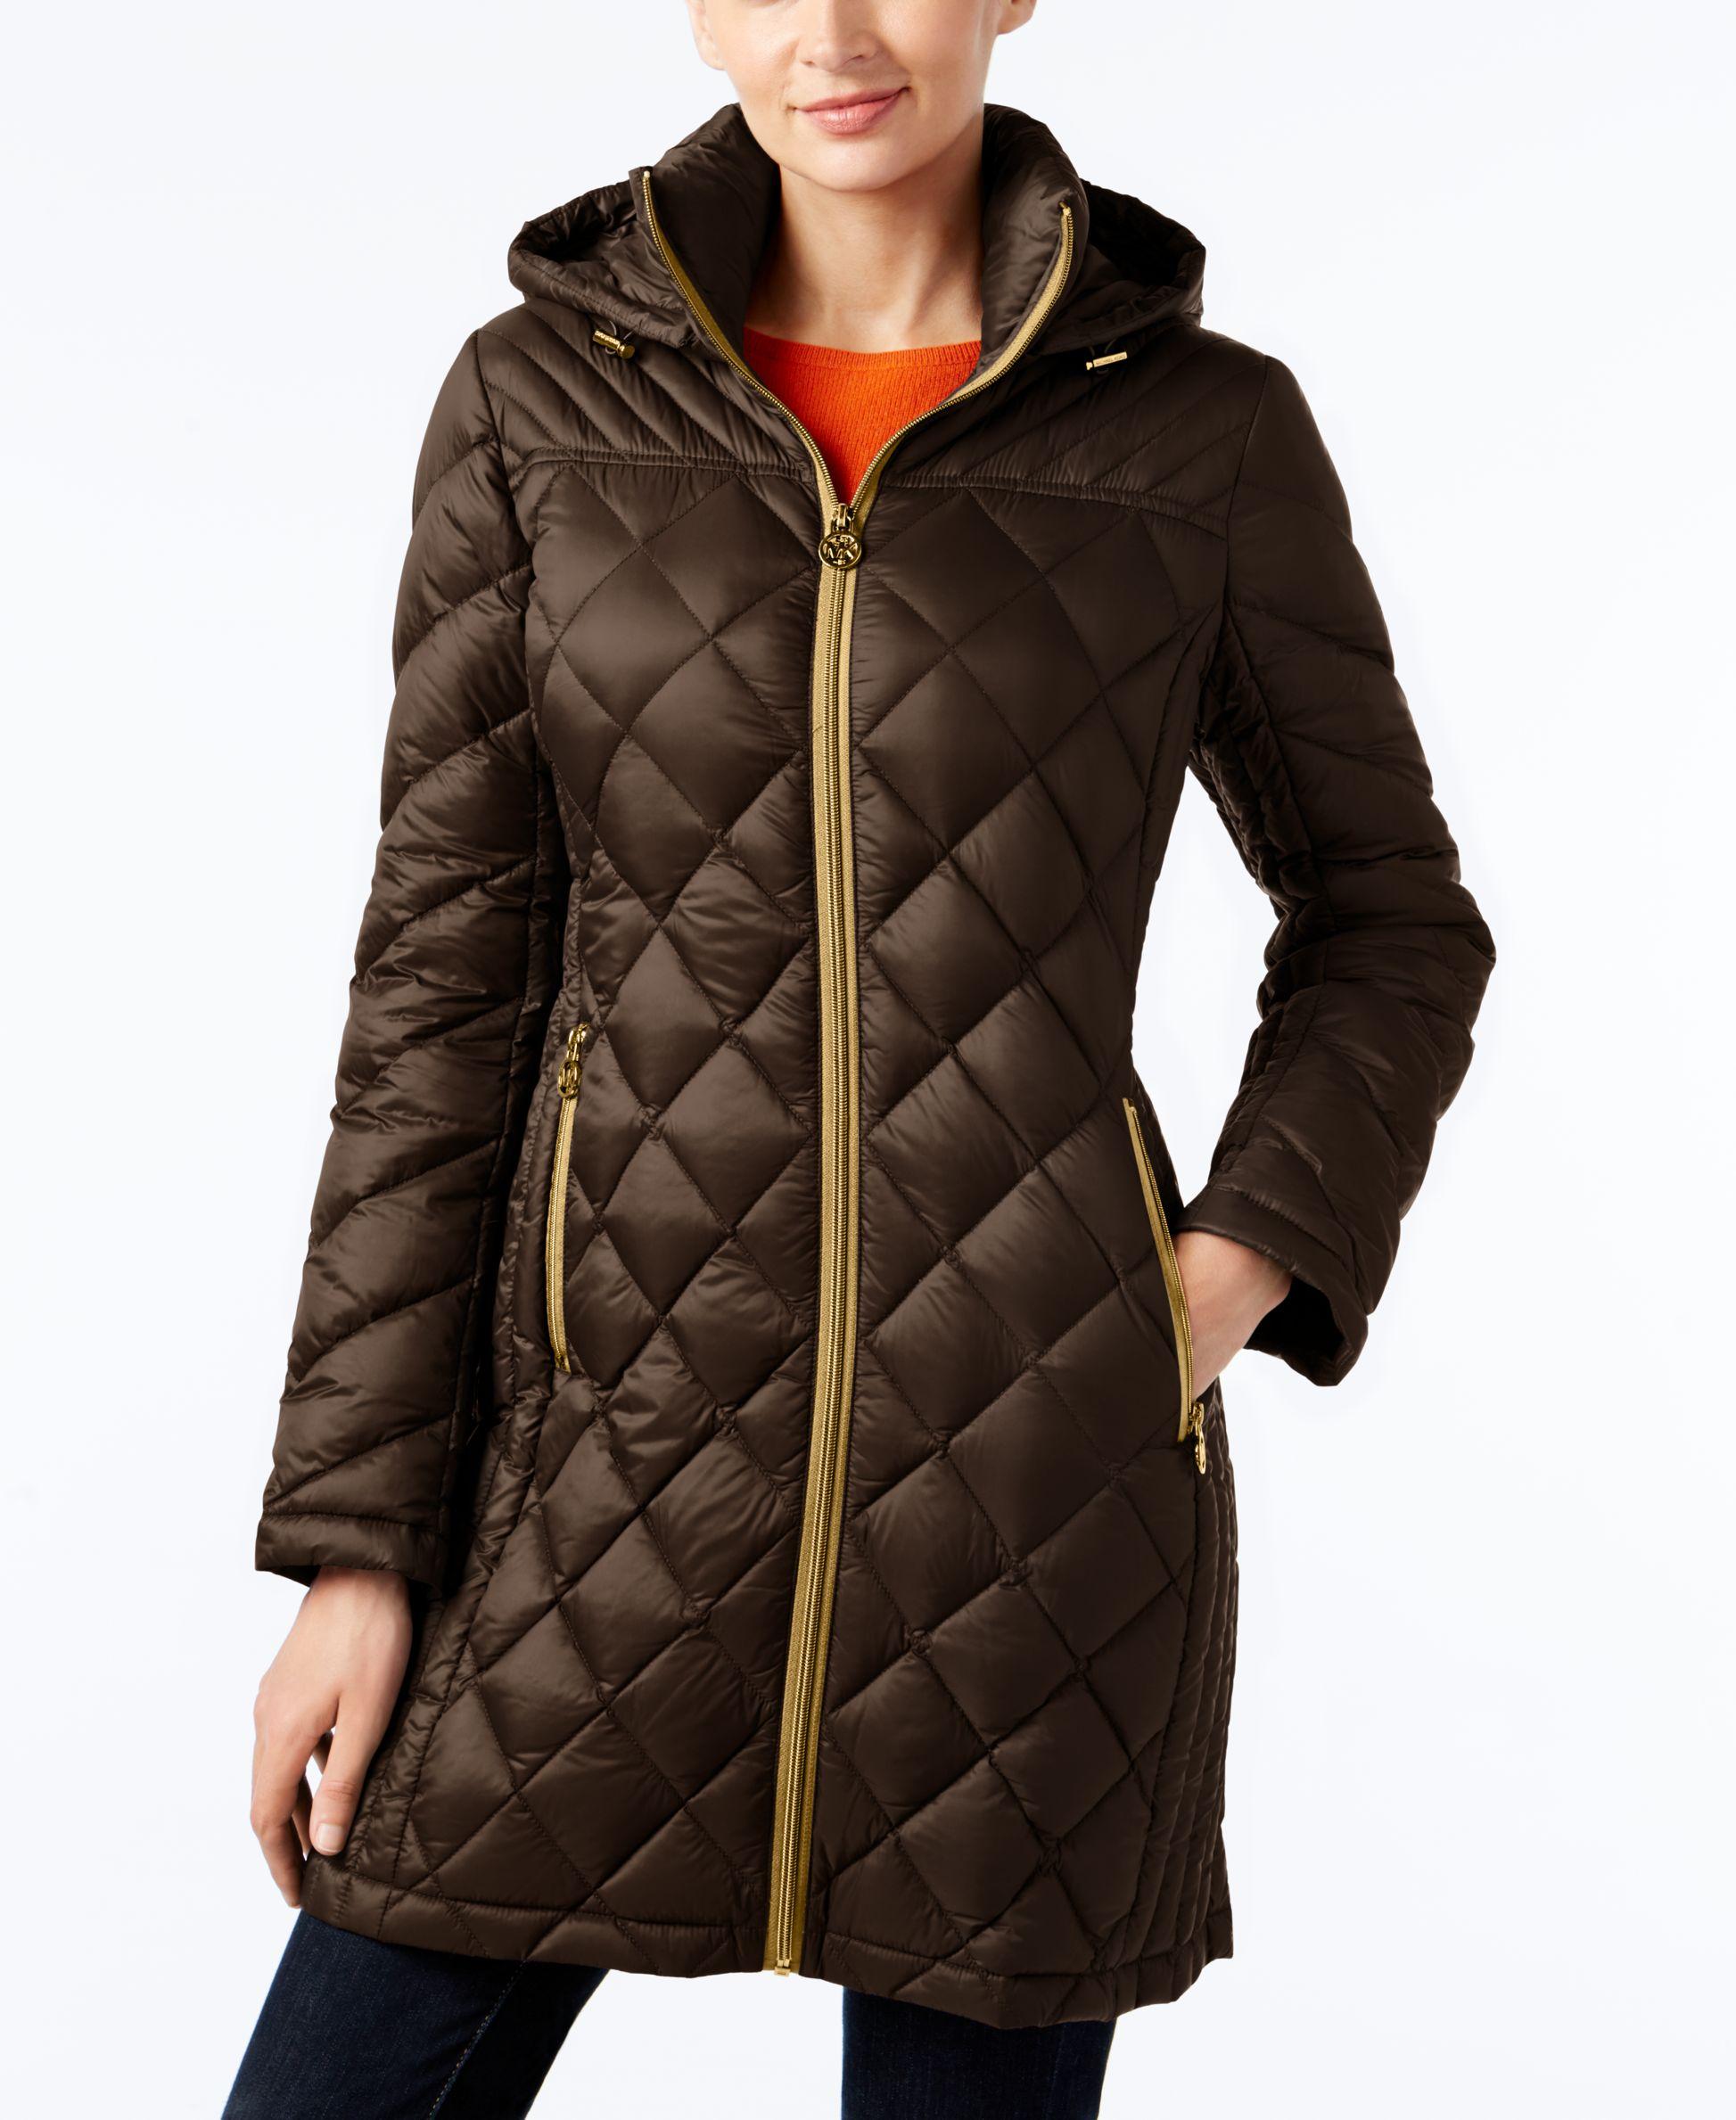 Lyst - Michael Kors Hooded Packable Down Diamond Quilted Puffer Coat in